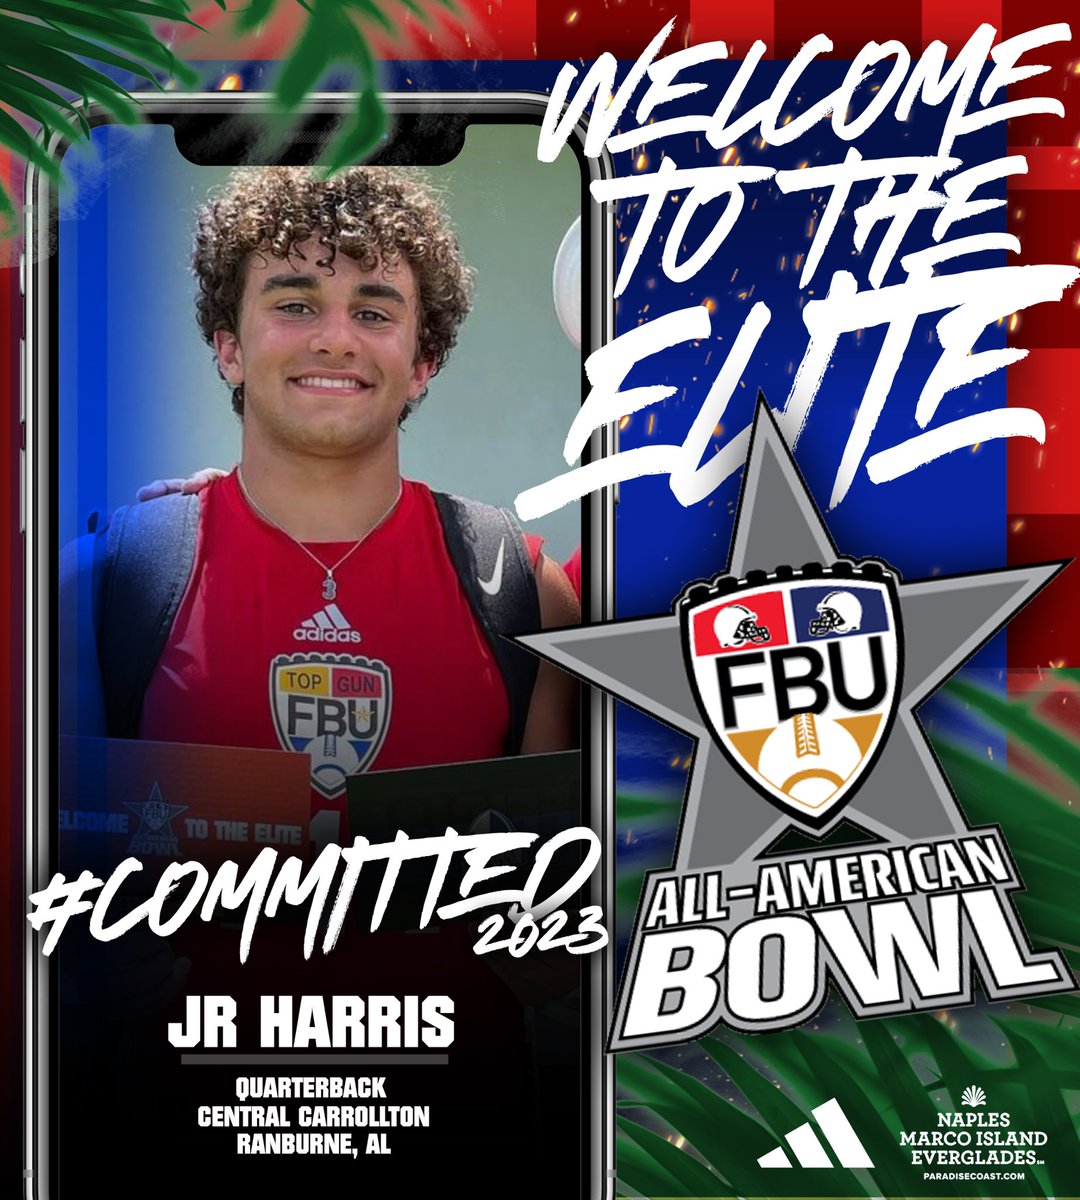 WELCOME TO THE ELITE 🌴 #FBUPathAlum @JRobHarris2 punched his ticket to the #FBUAllAmerican Bowl 2023 👀 See you in Naples, FL this December 🔥 #FBU #GetBetterHere